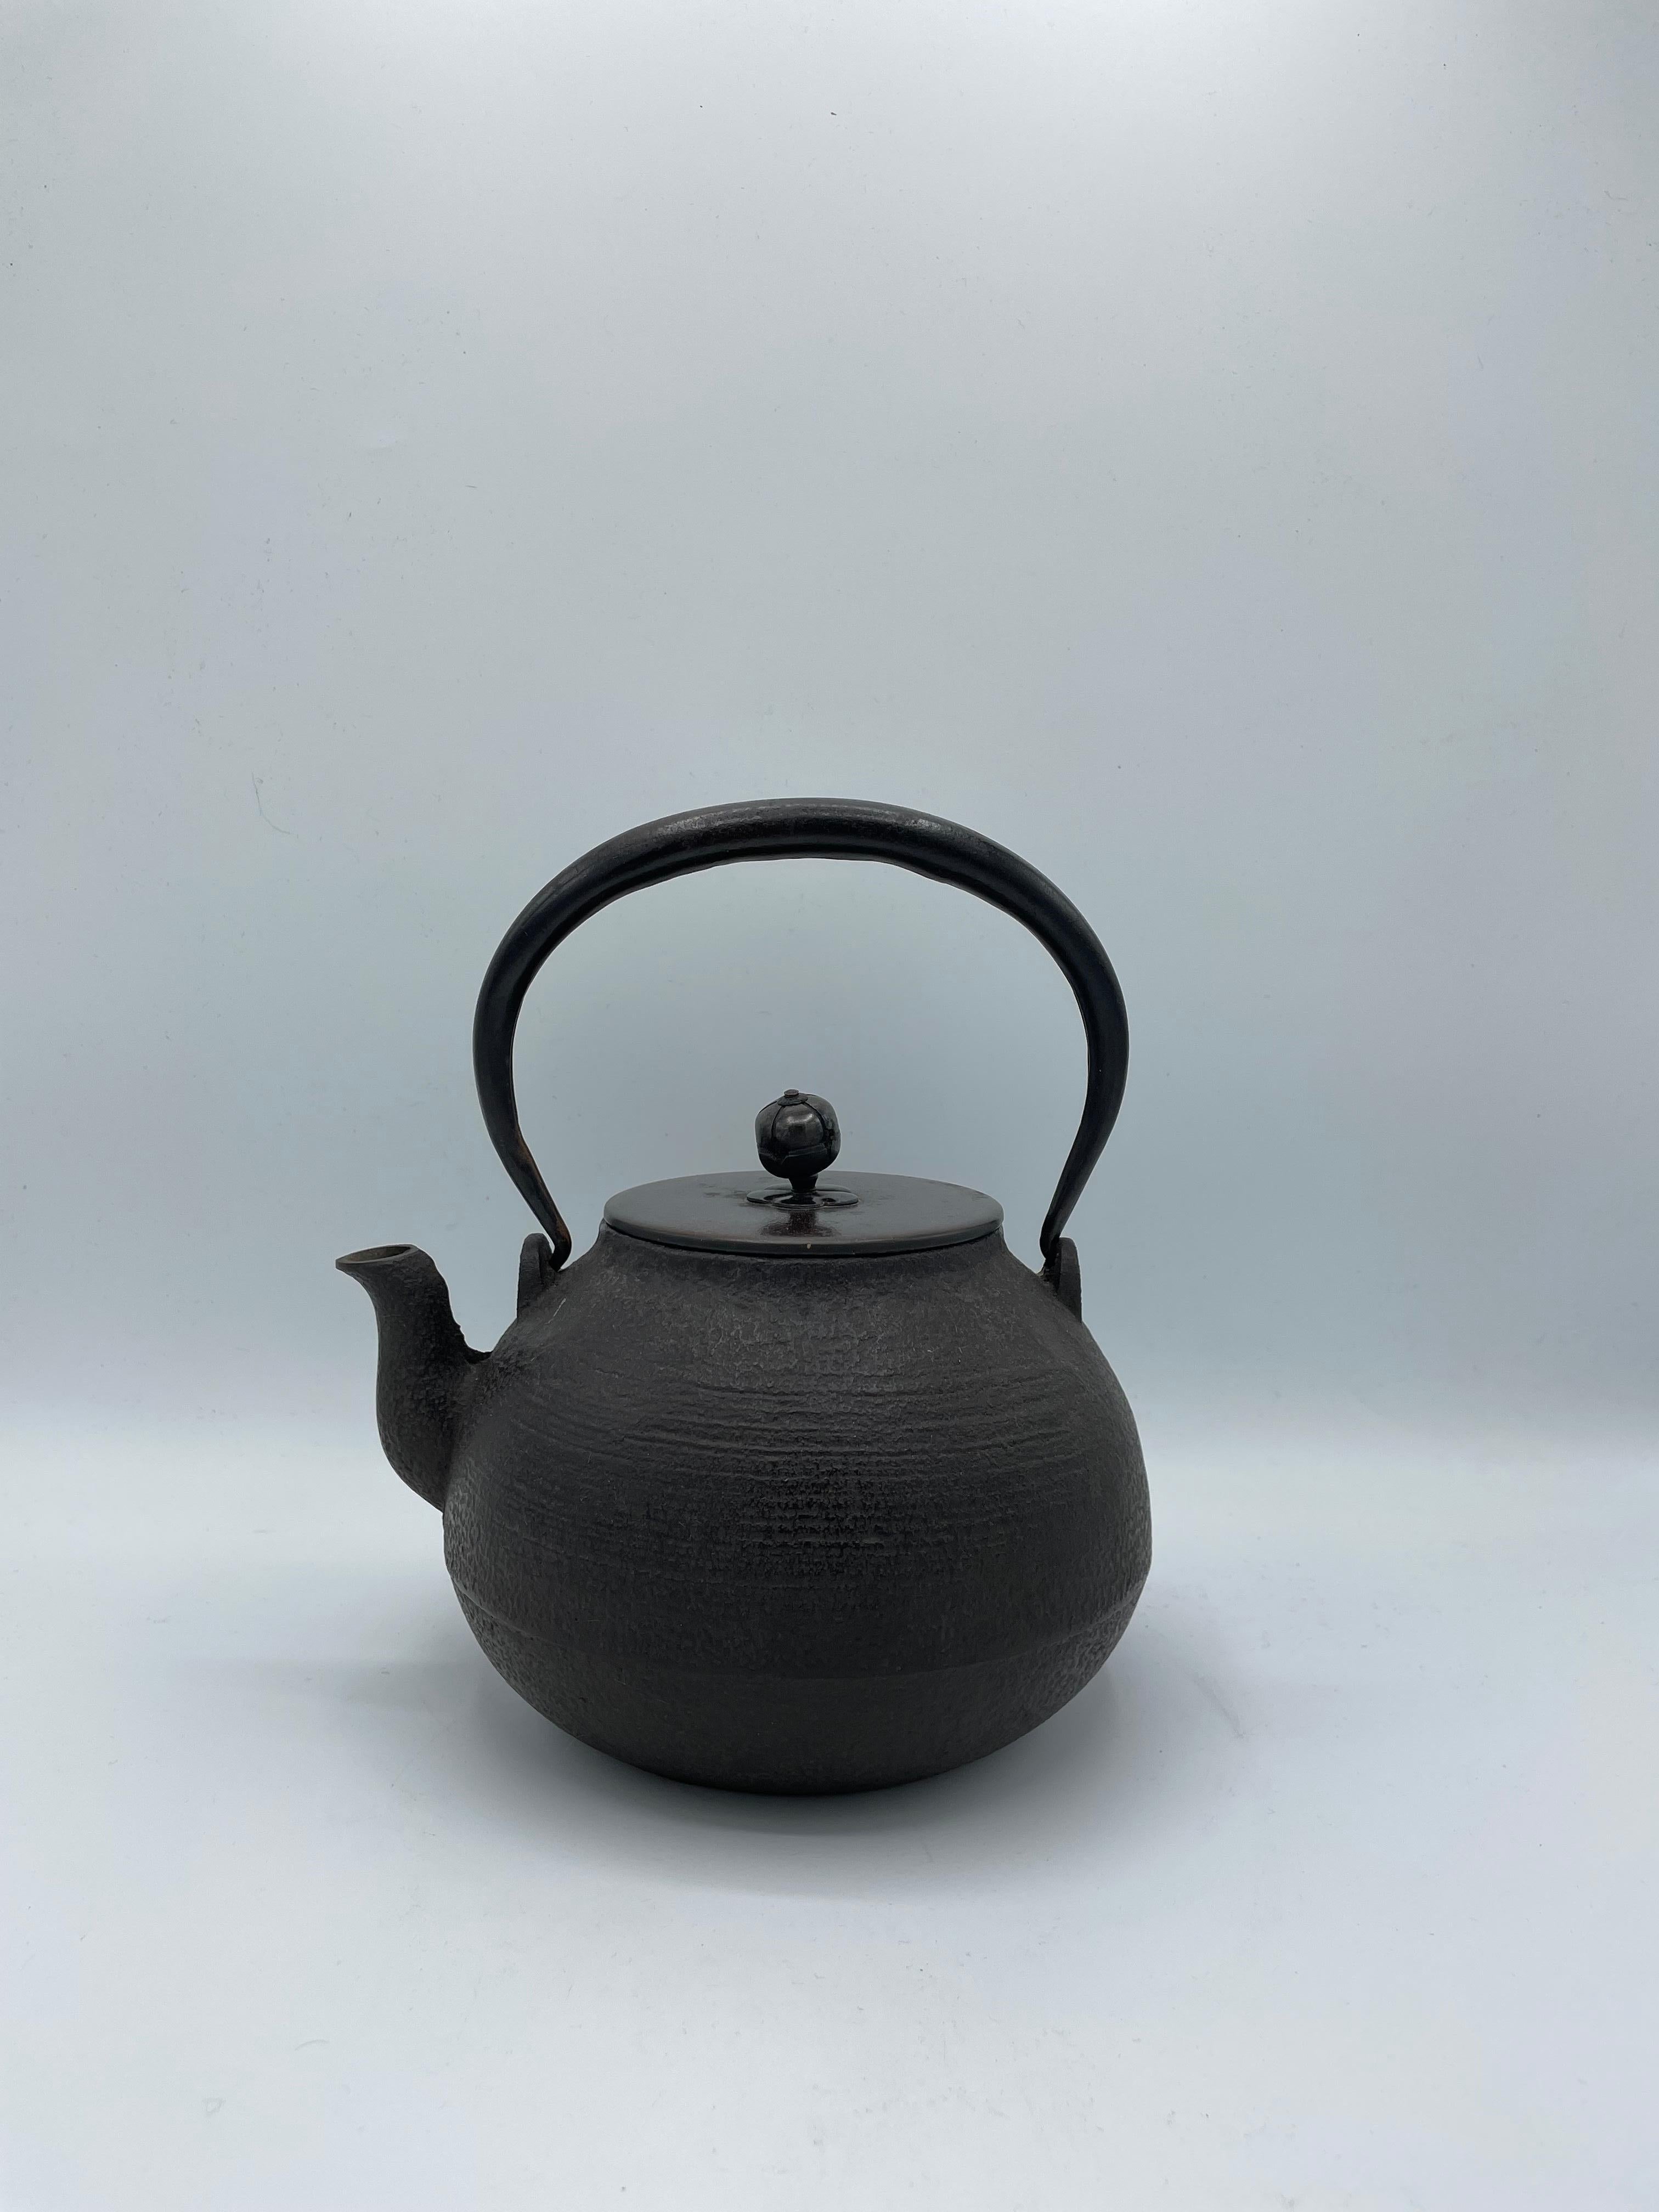 This kettle was made in 1930s, in Showa era. 
The iron kettles like this item are called 'Tetsubin' in Japan.
It can be put on the fire or an induction plate. Also we can use it as decoration.
Do not scratch the bottom of the kettle to leave the